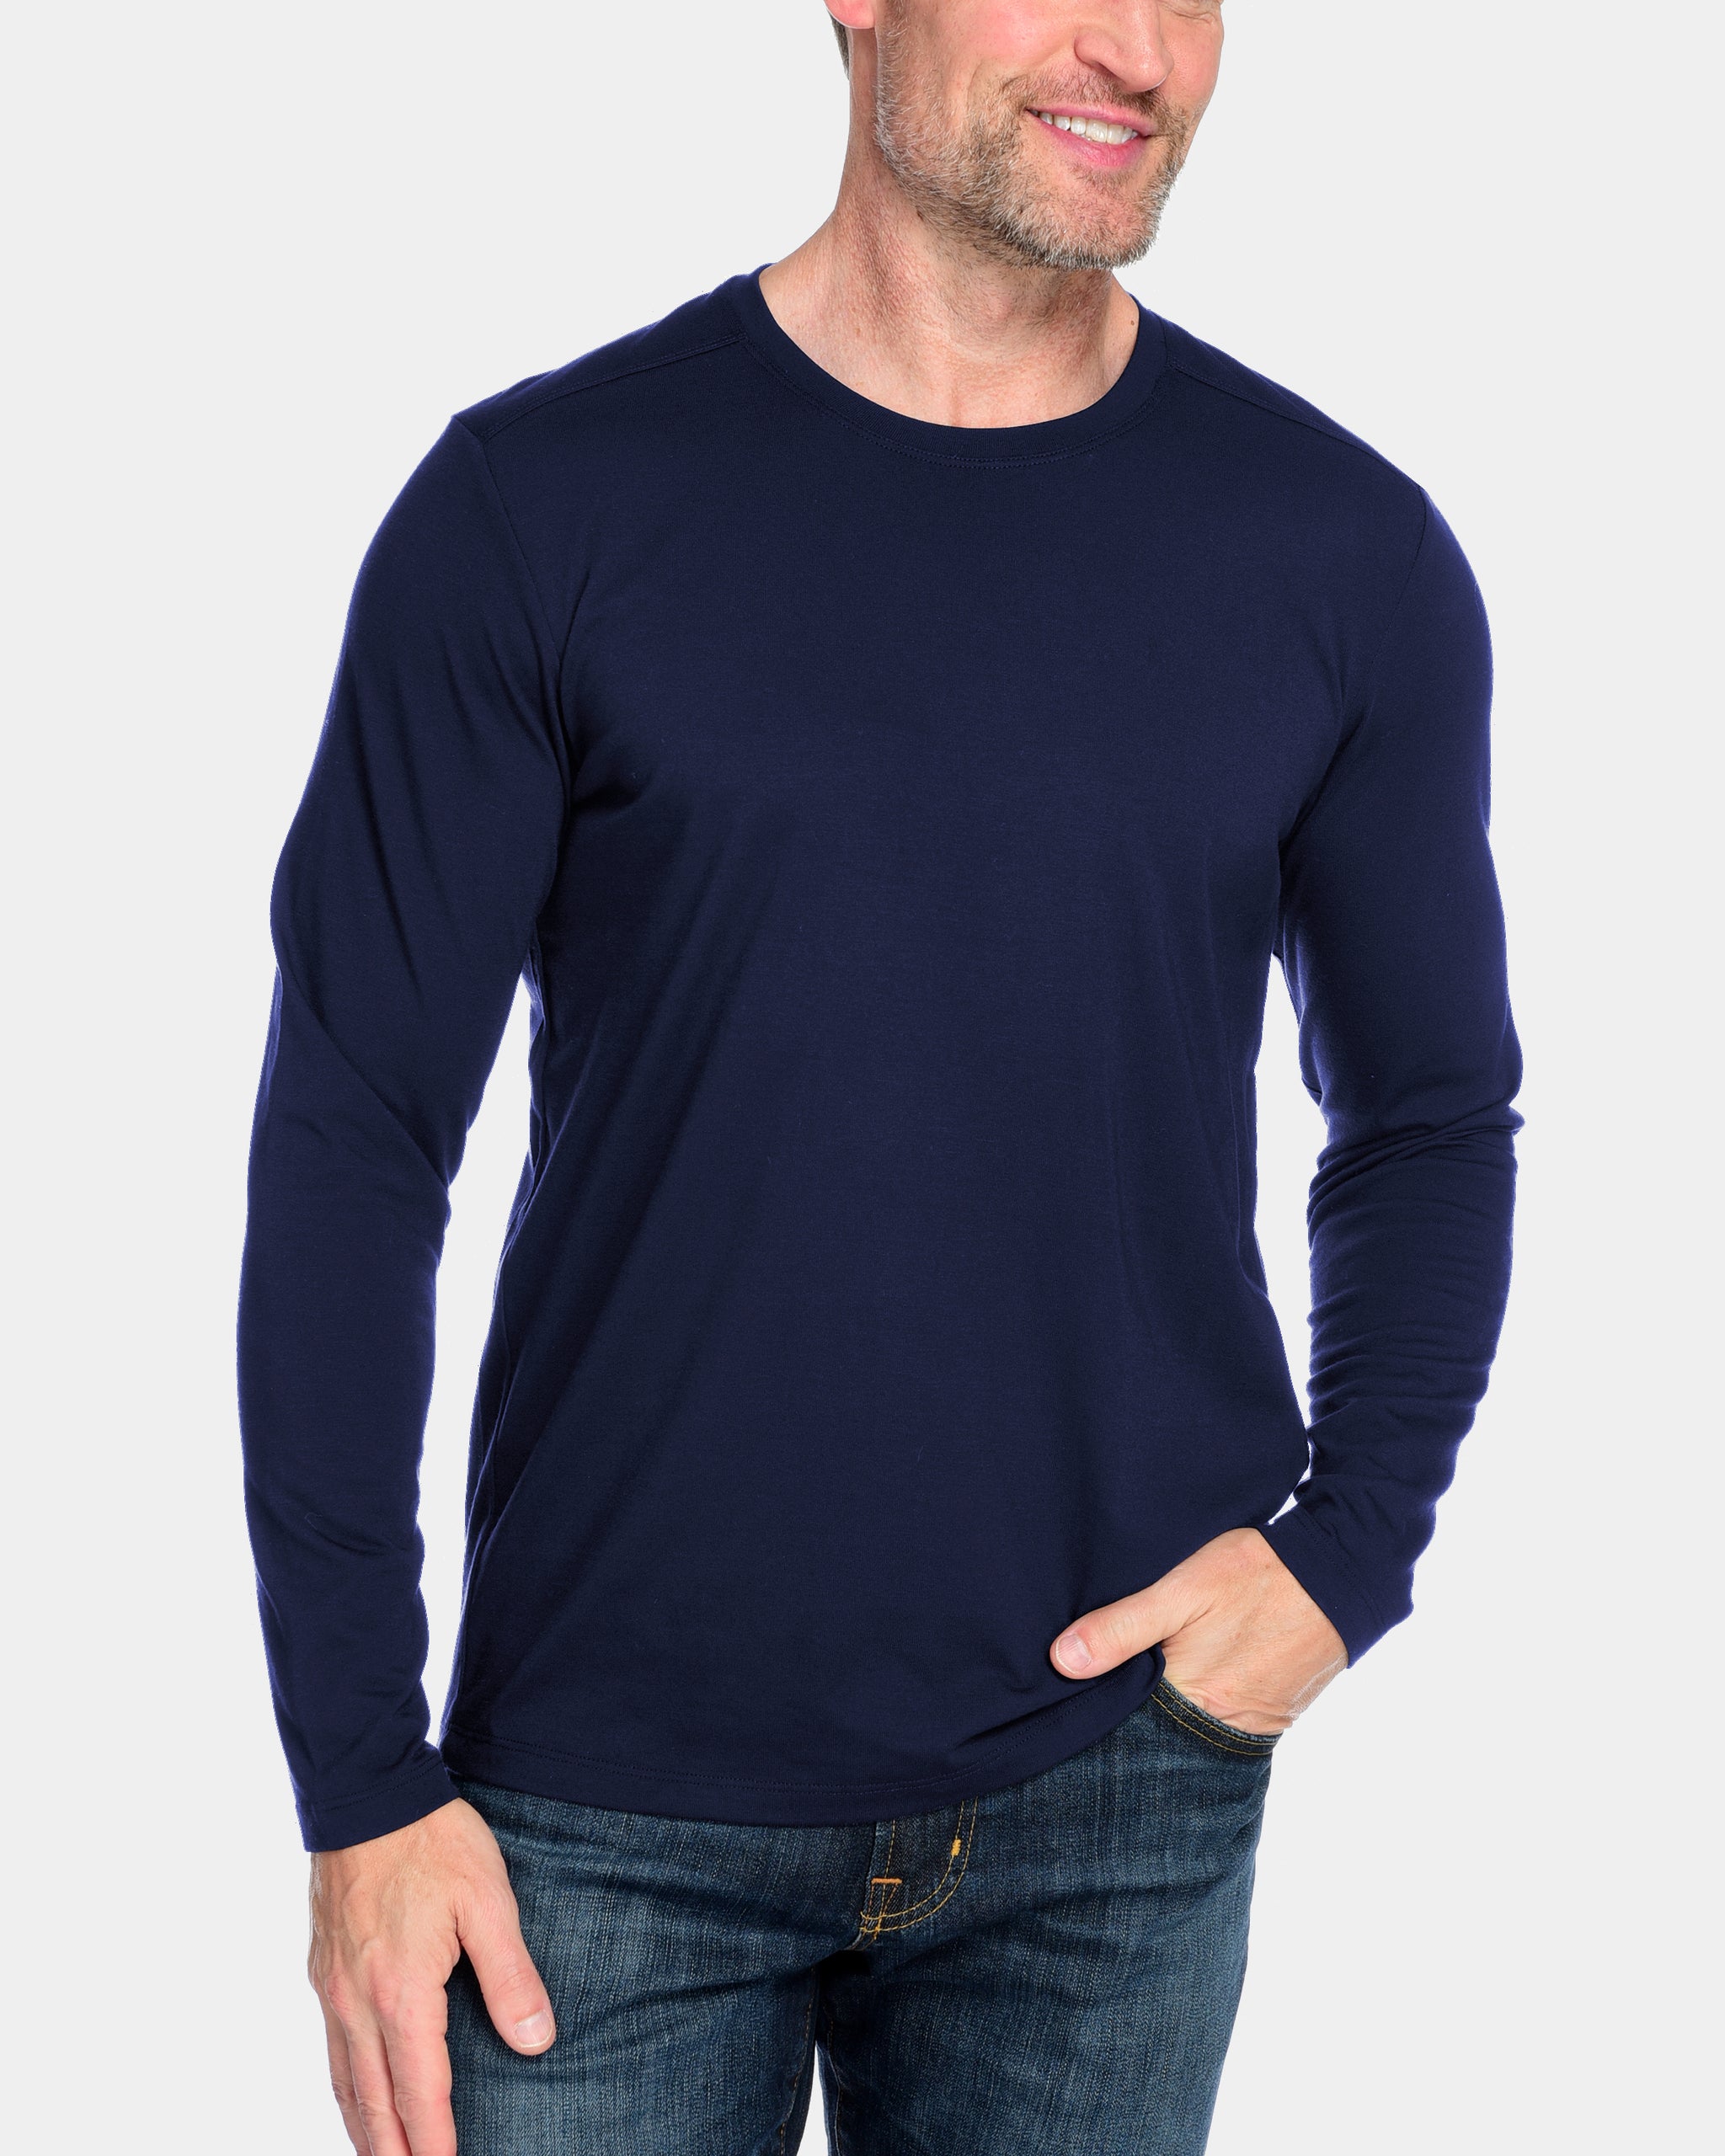 Men's Cashmere Long Sleeve Crew by Fisher + Baker